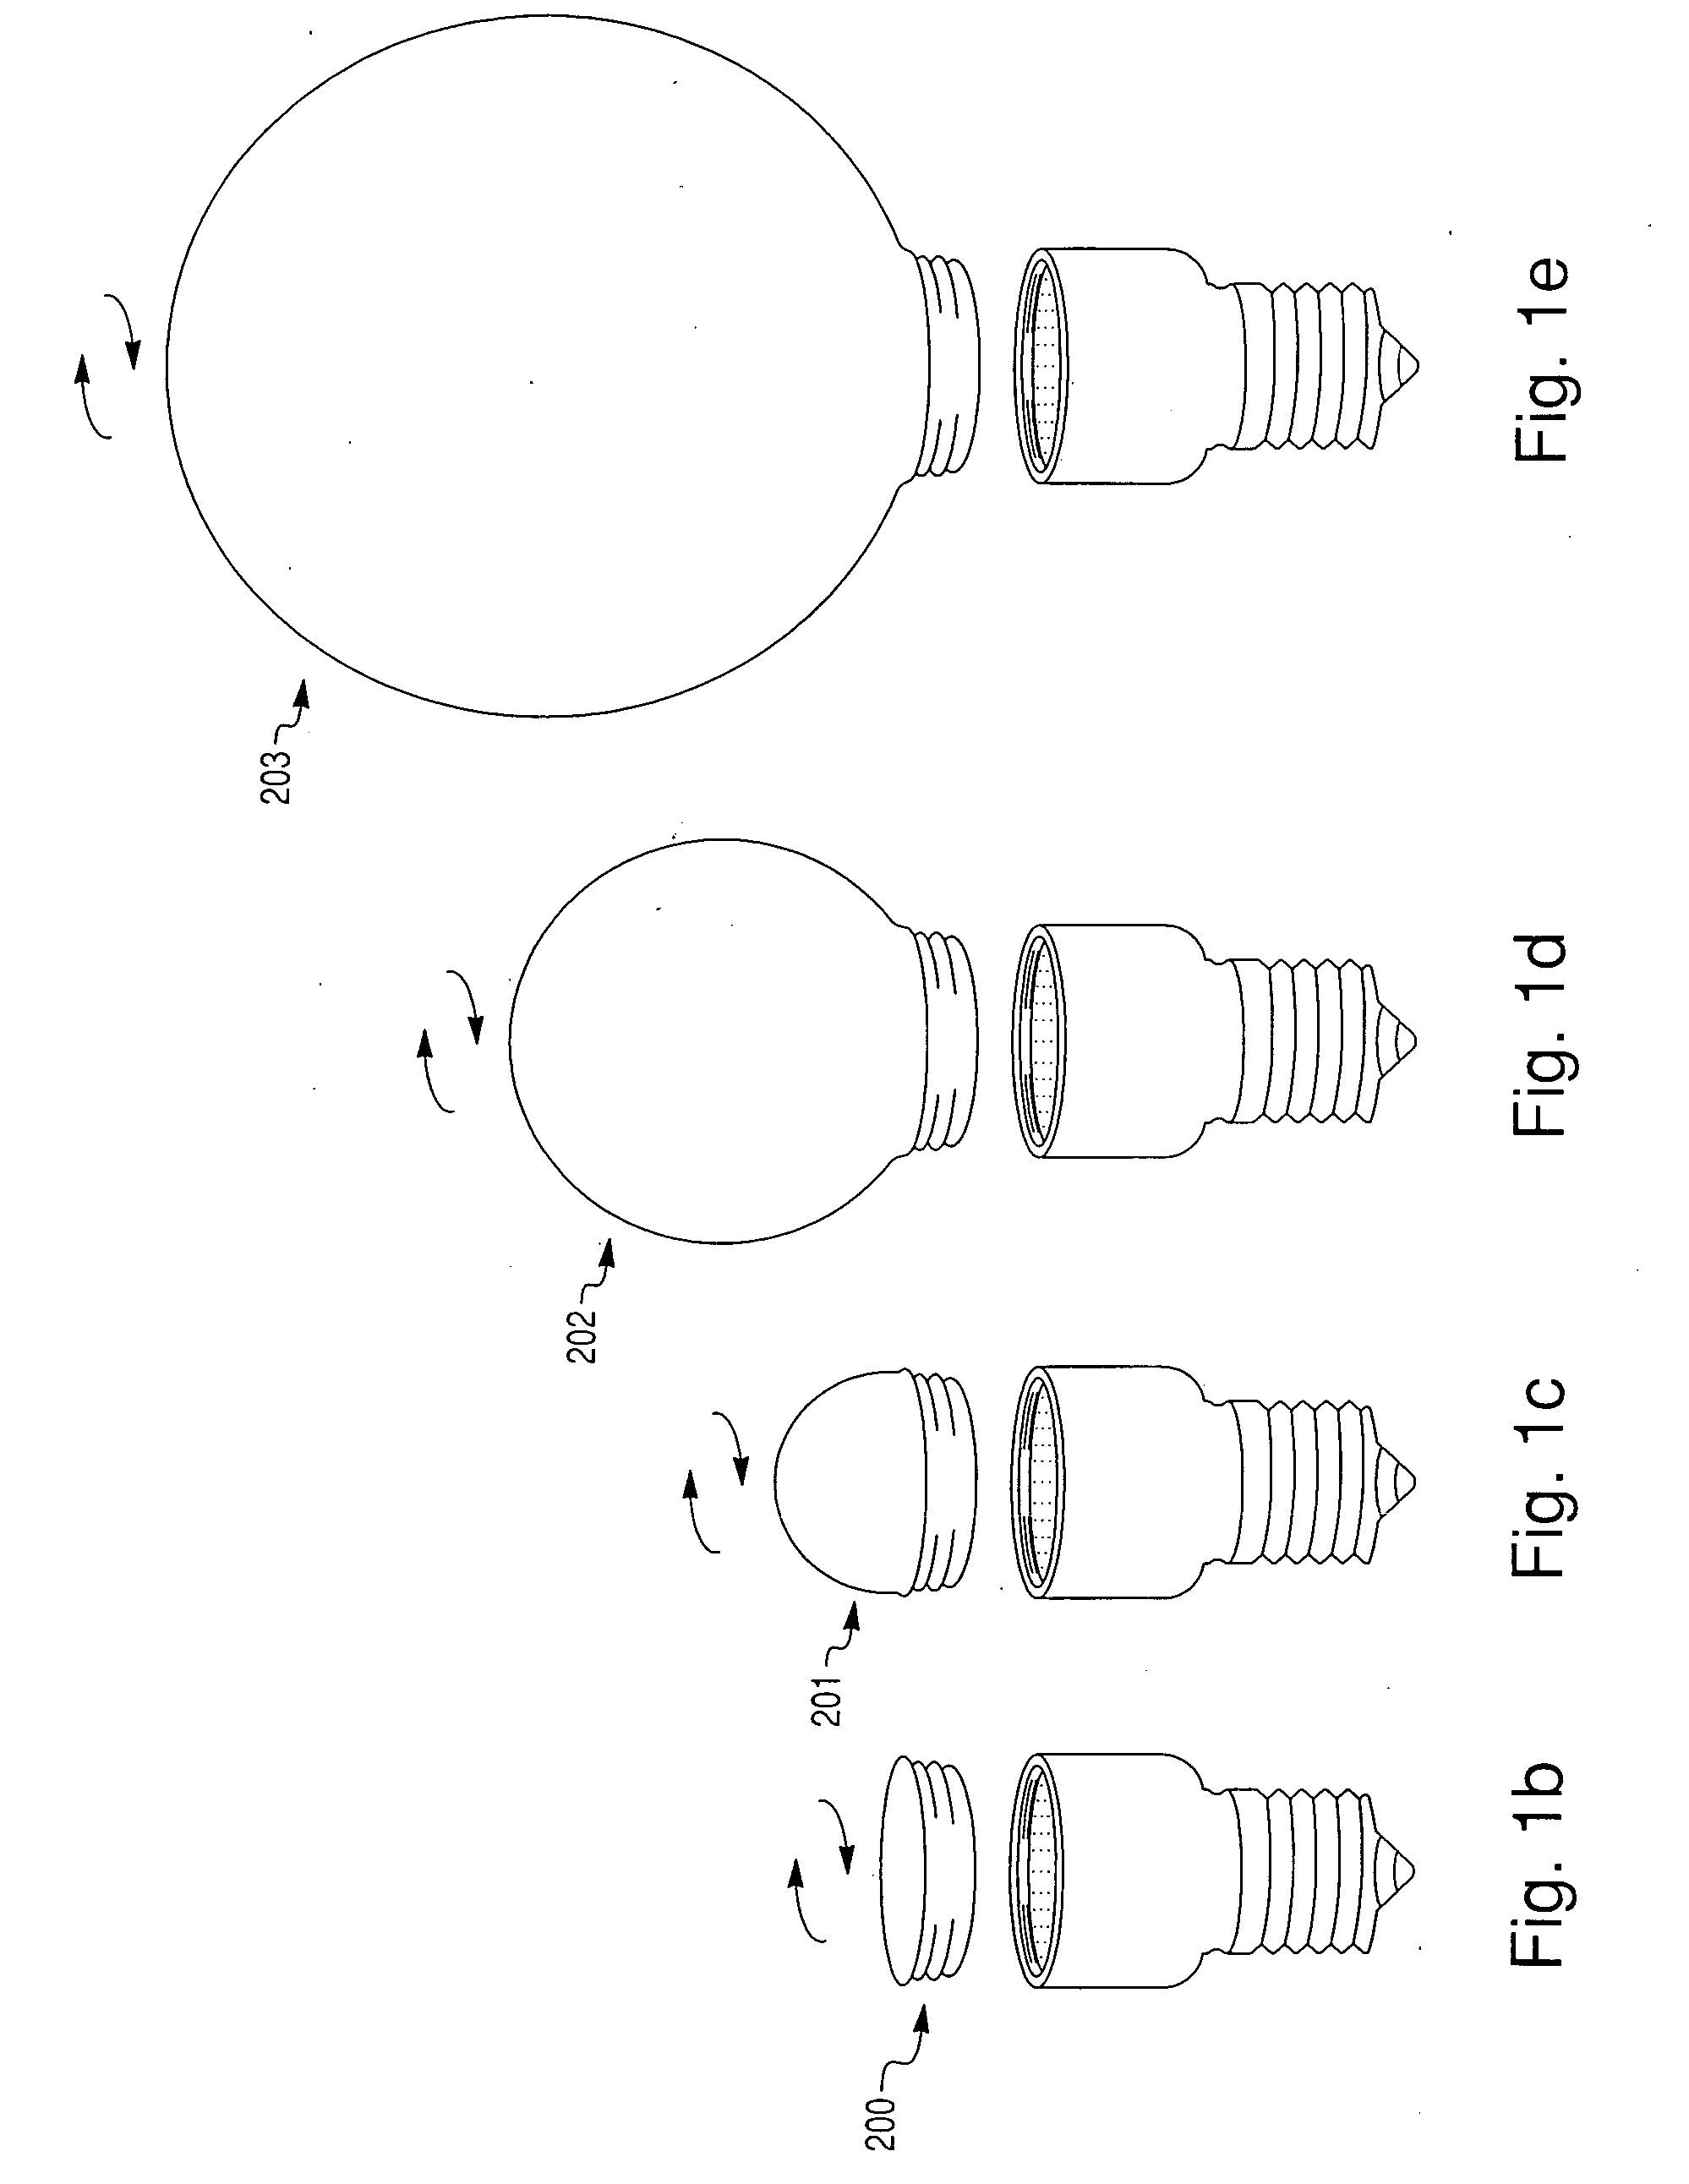 Solid state lighting device with improved thermal management, improved power management, adjustable intensity, and interchangable lenses